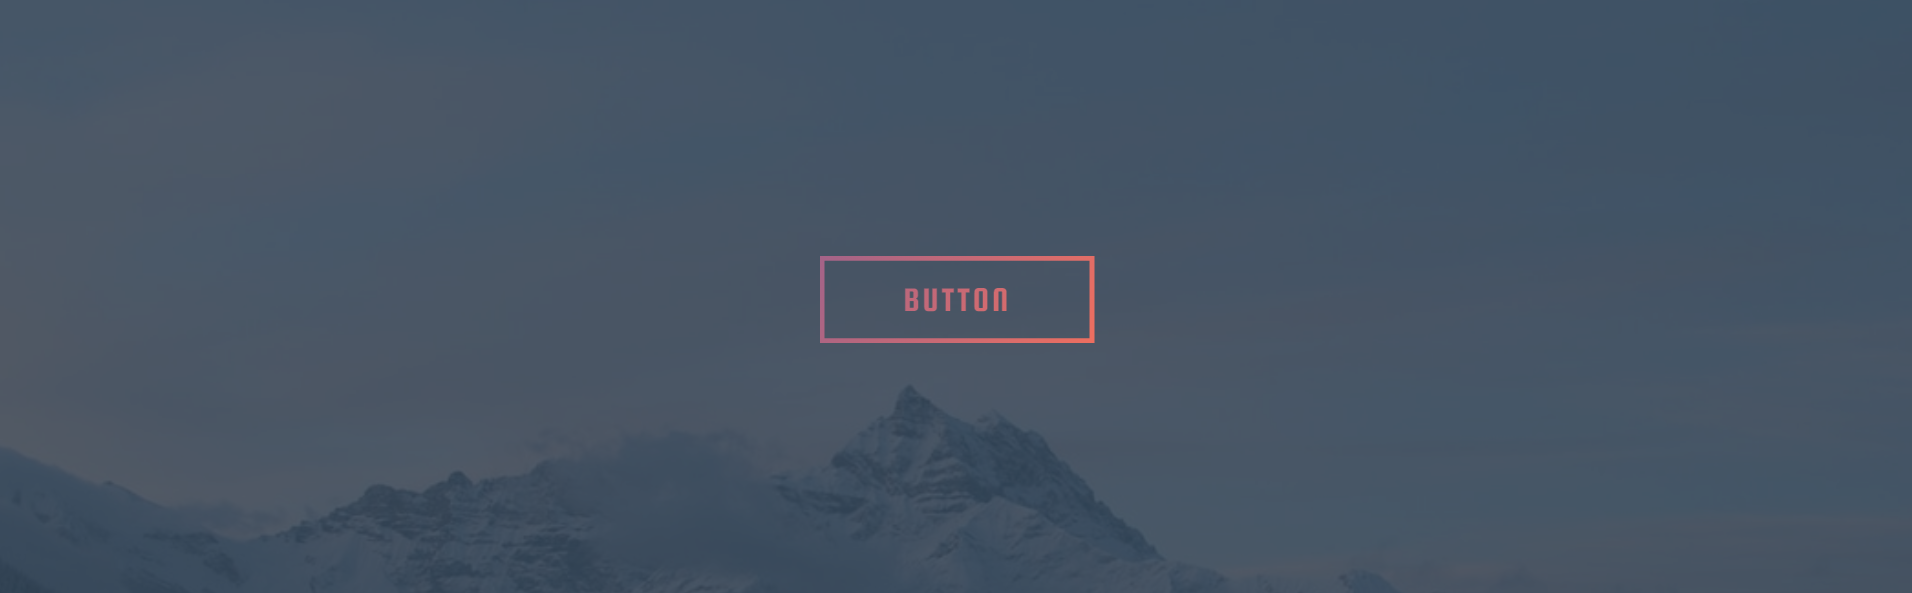 Animated Gradient Ghost Button